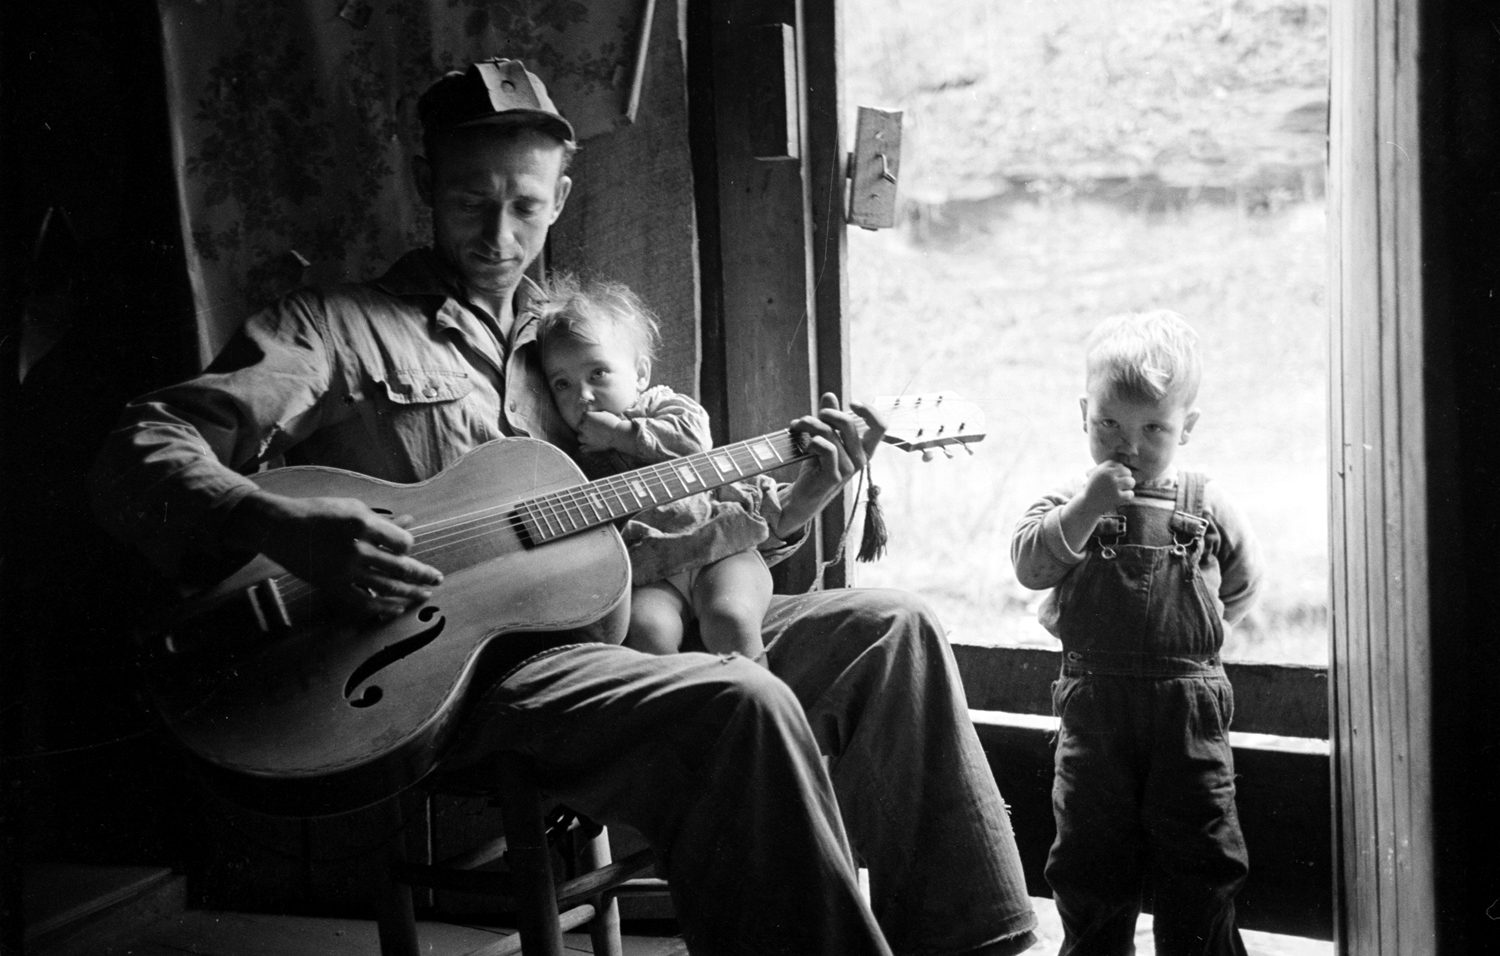 Family life in Leslie County's mountains has the warmth of a father singing to his children.